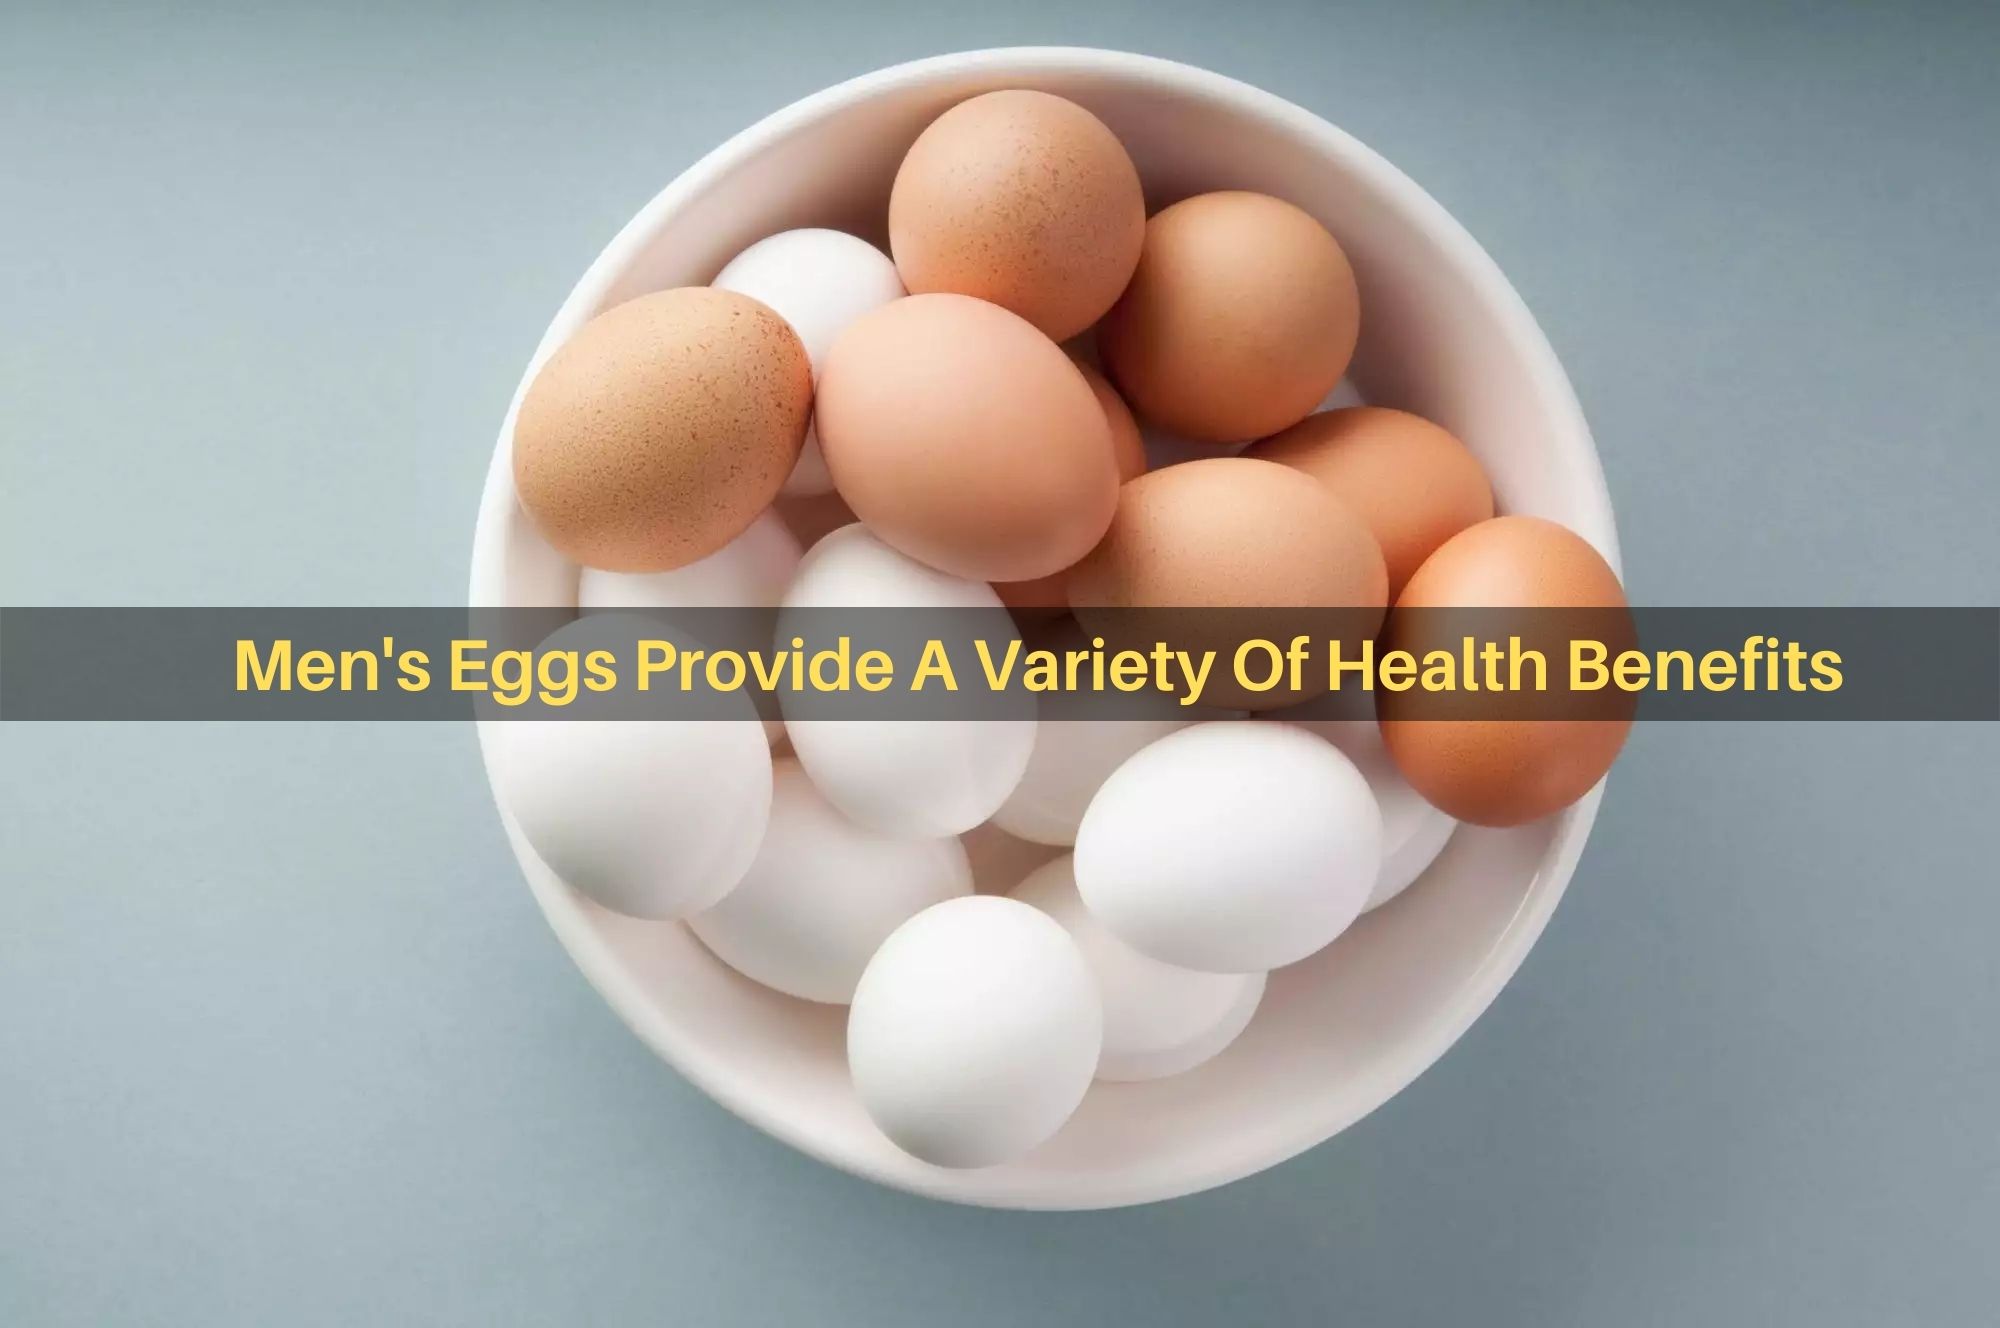 Men's Eggs Provide A Variety Of Health Benefits